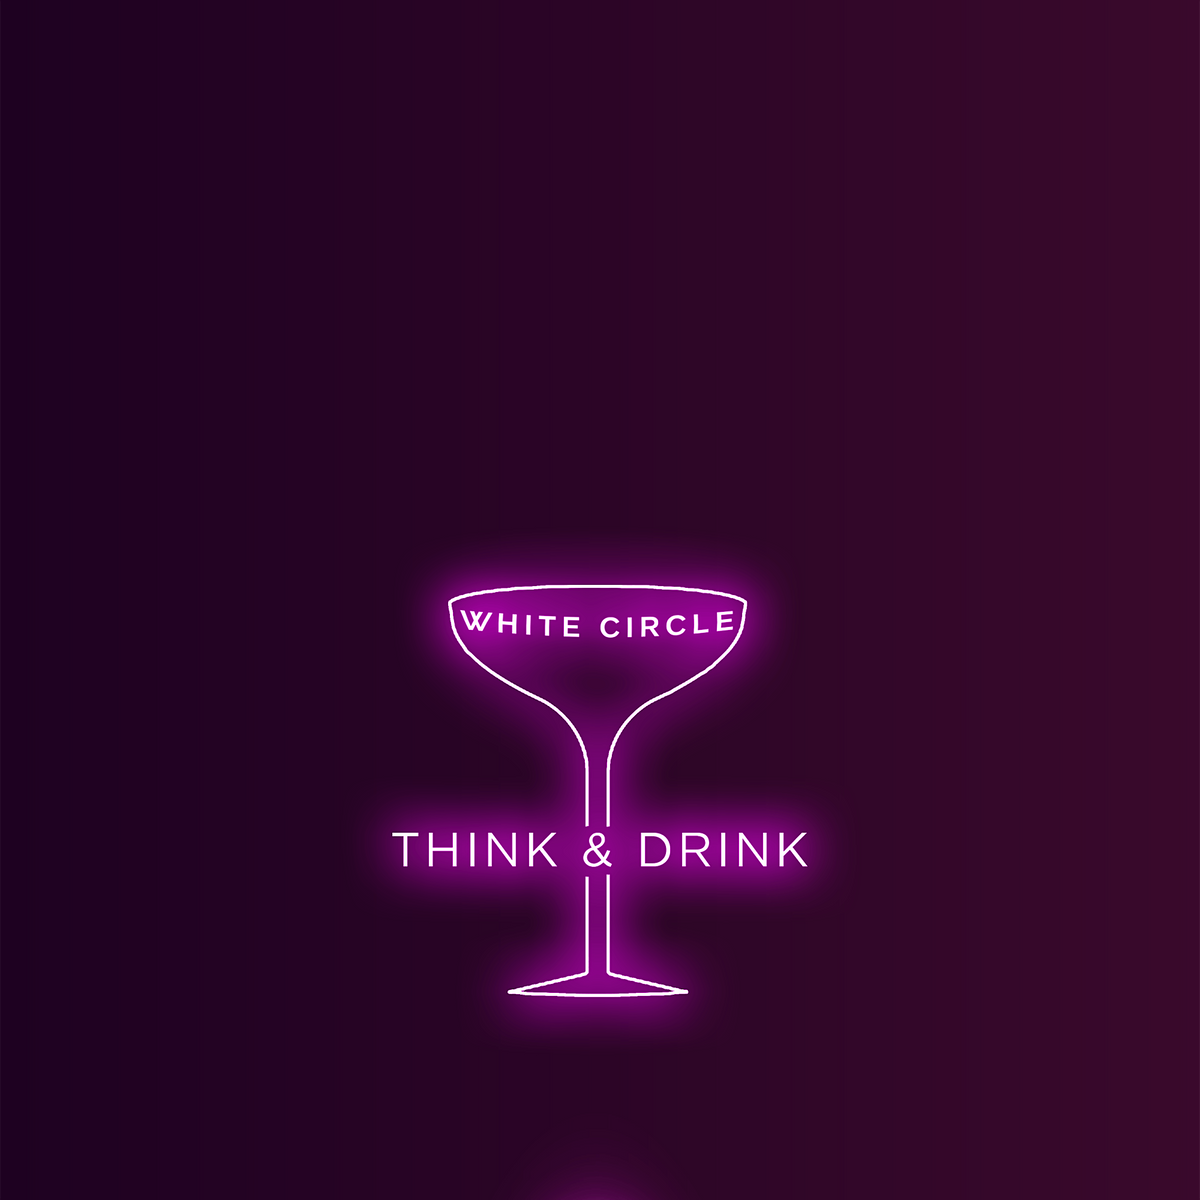 THINK & DRINK by WHITE CIRCLE